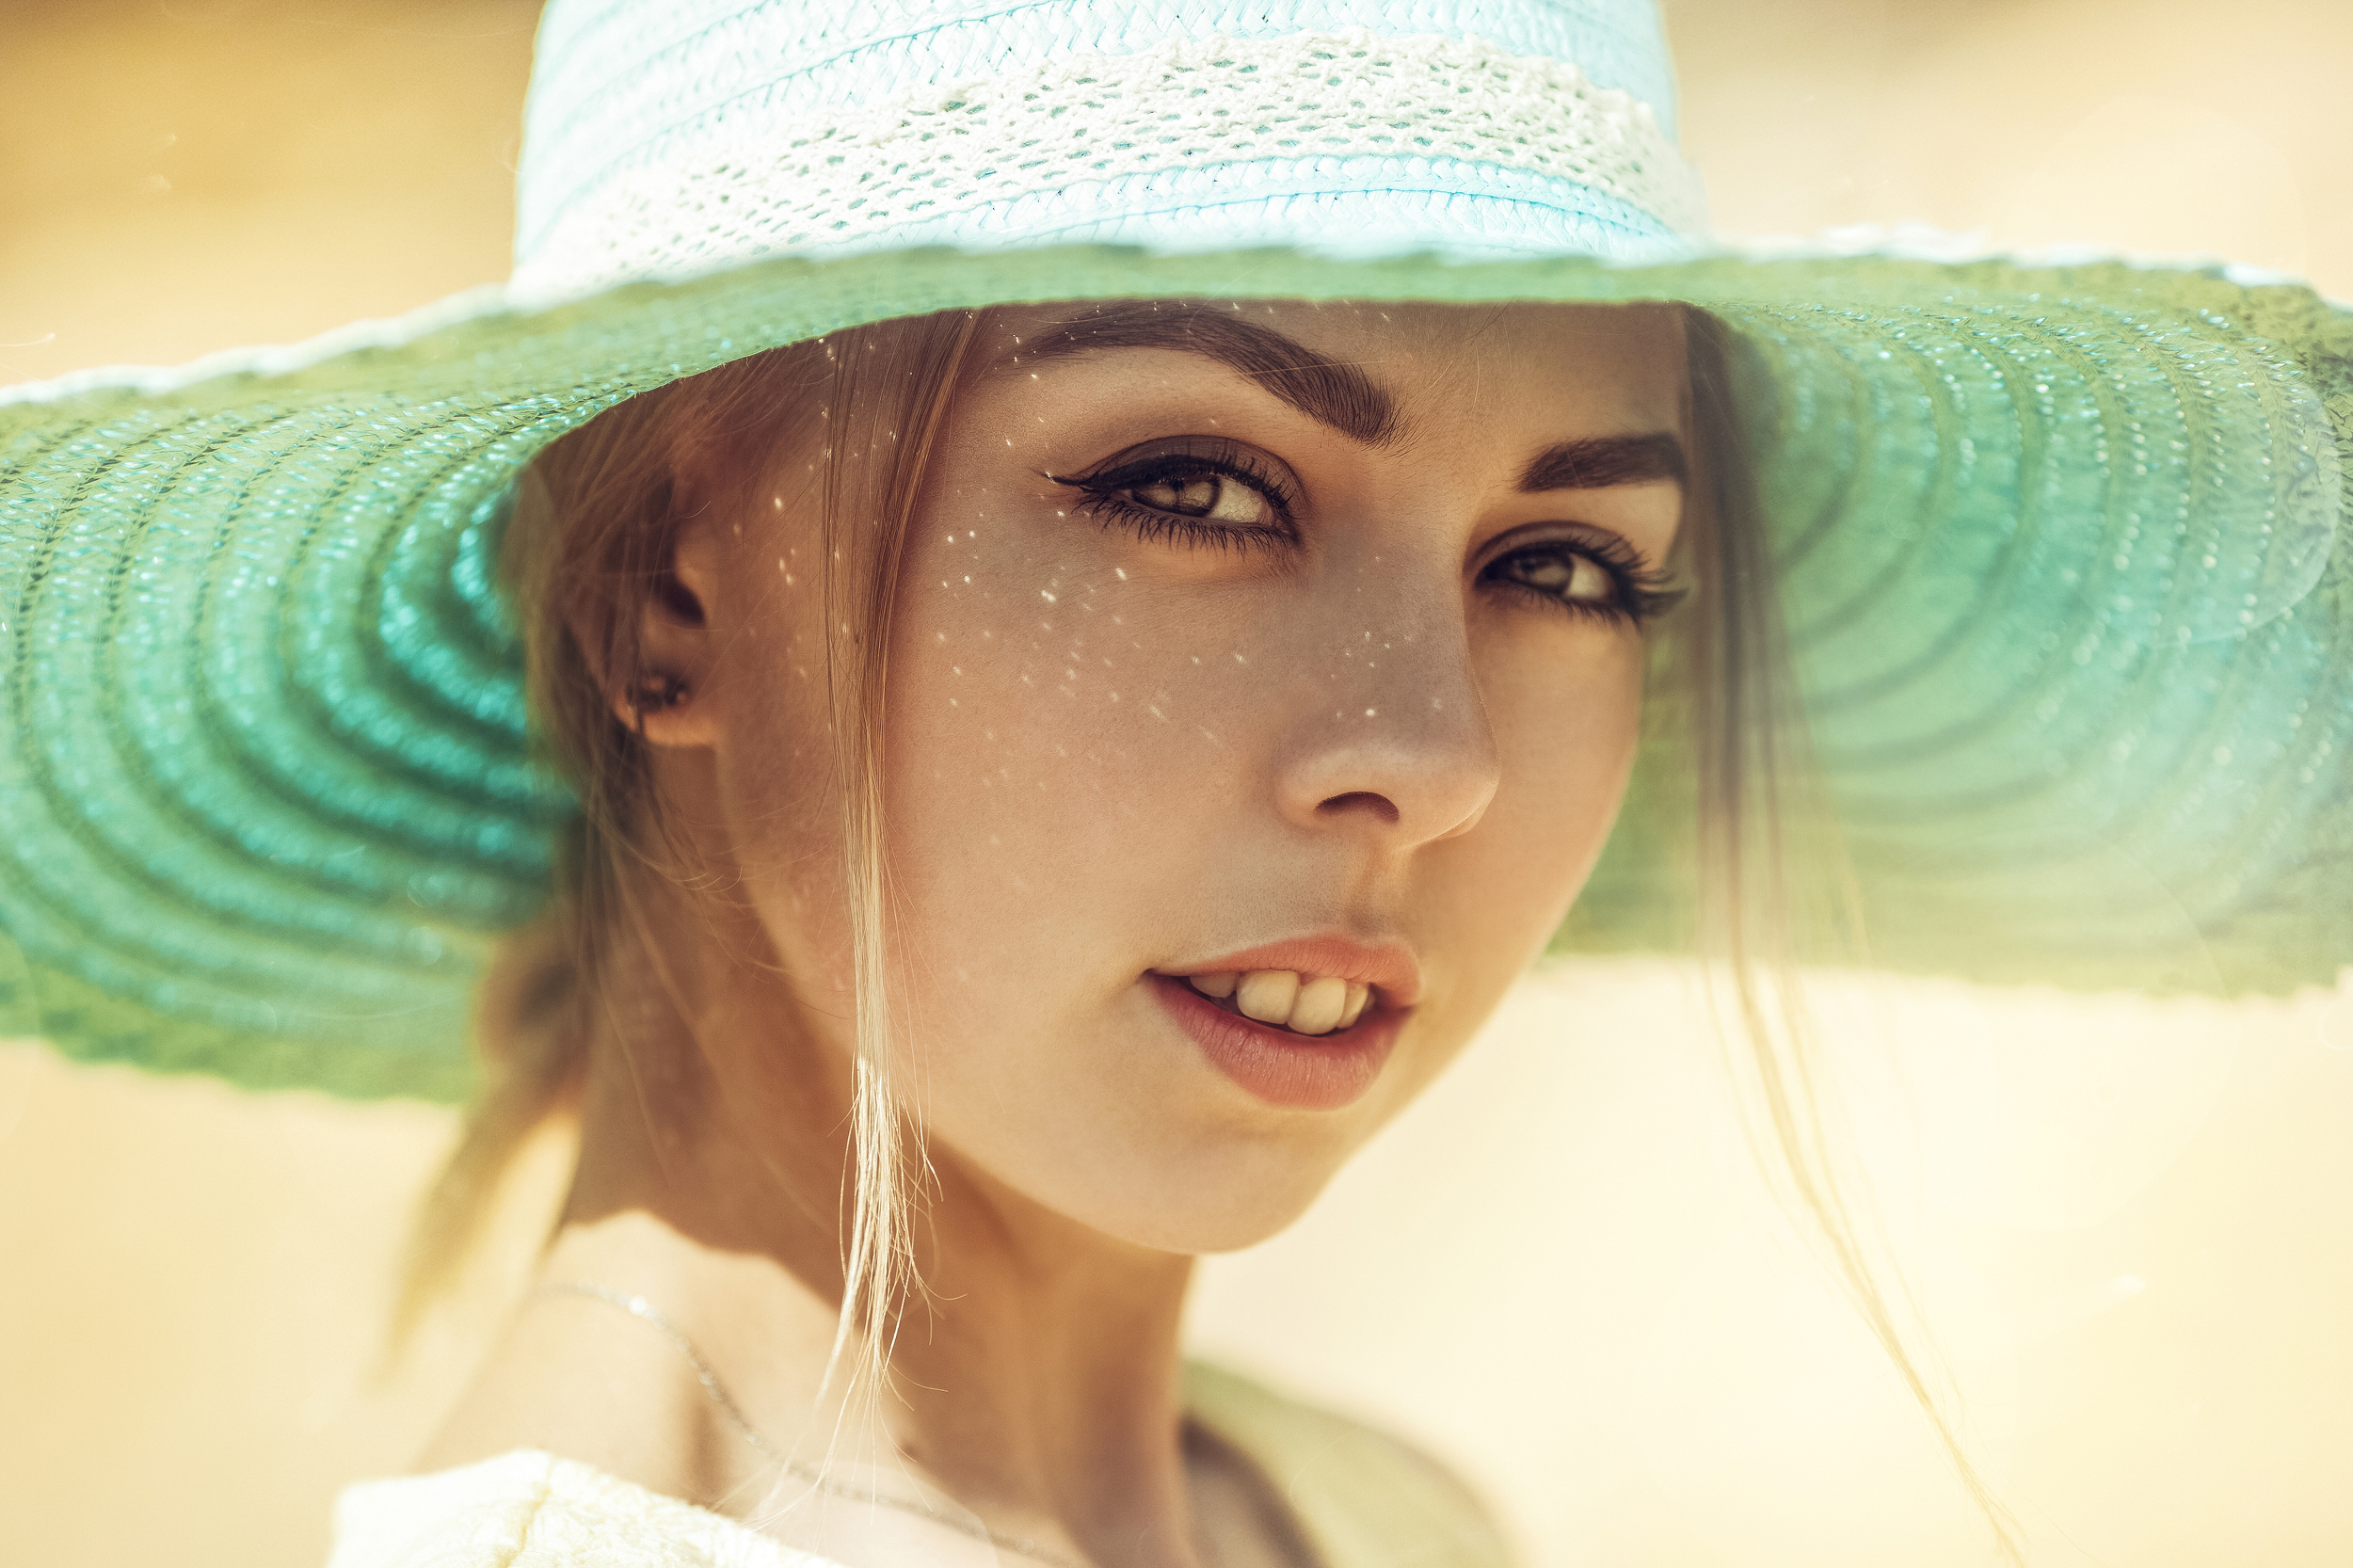 Women Model Blonde Long Hair Face Sunlight Hat Women With Hats Teeth Looking At Viewer 2500x1666